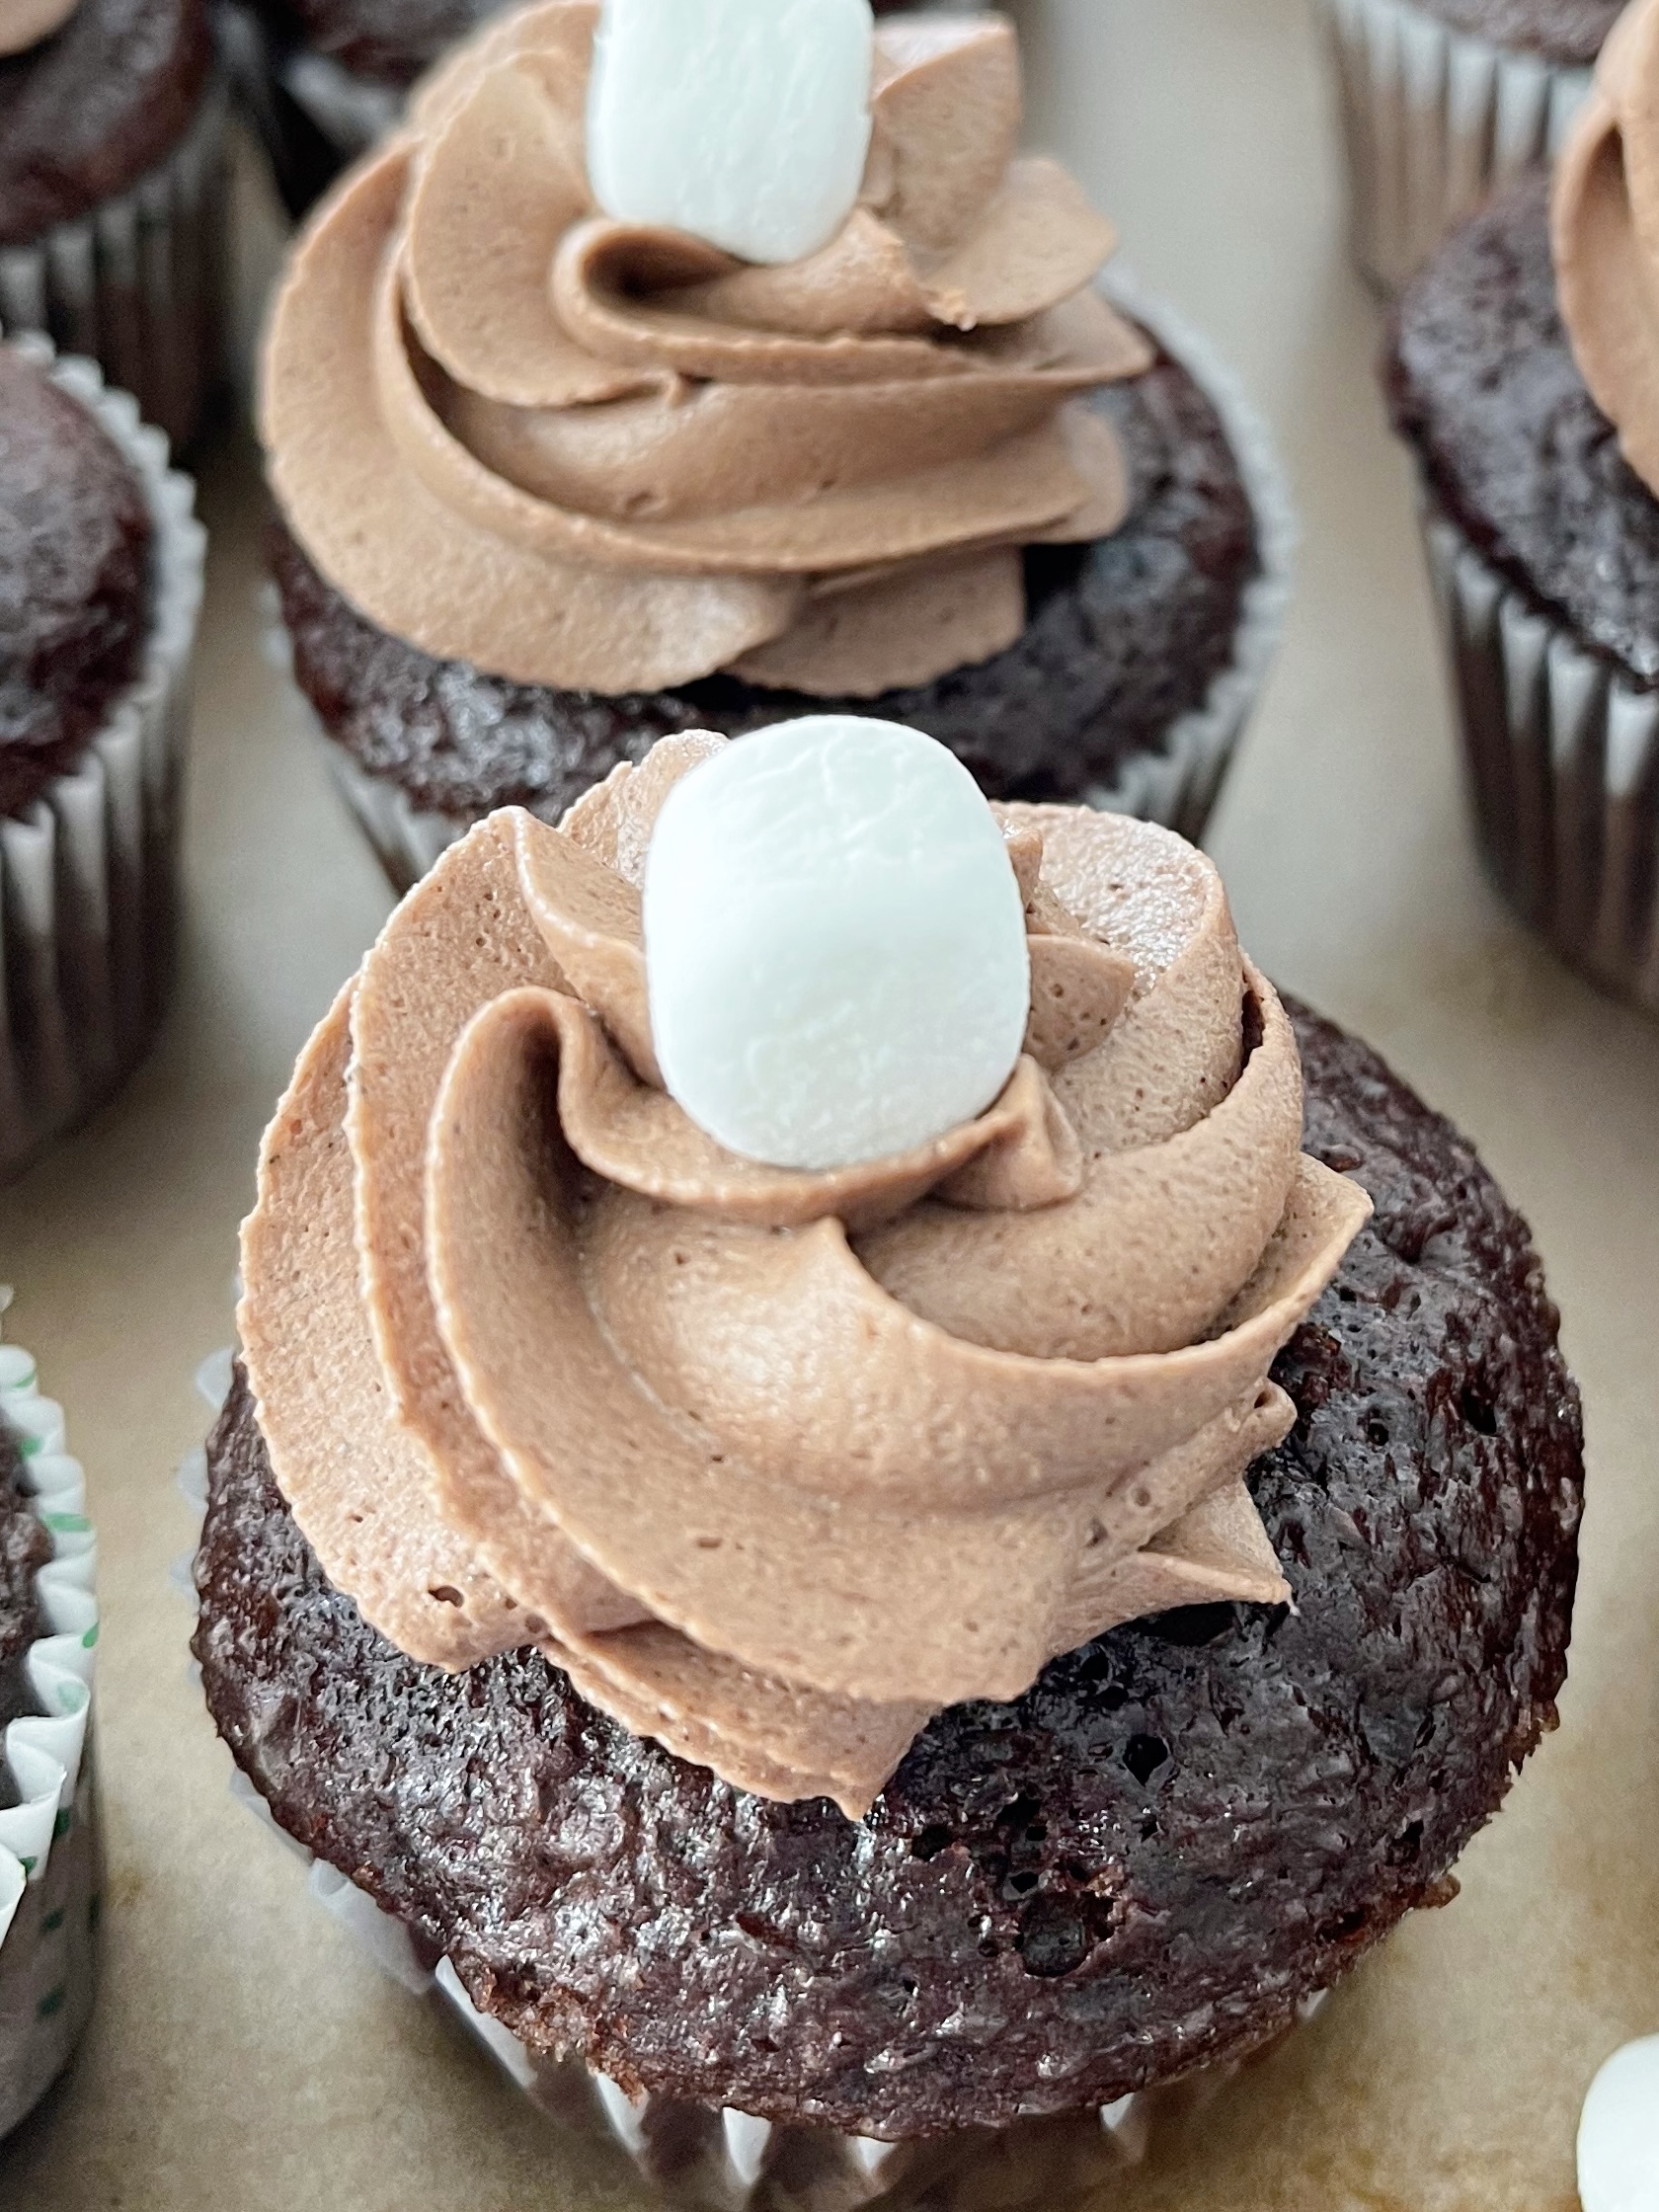 A chocolate cupcake with hot chocolate frosting and a mini marshmallow on top.